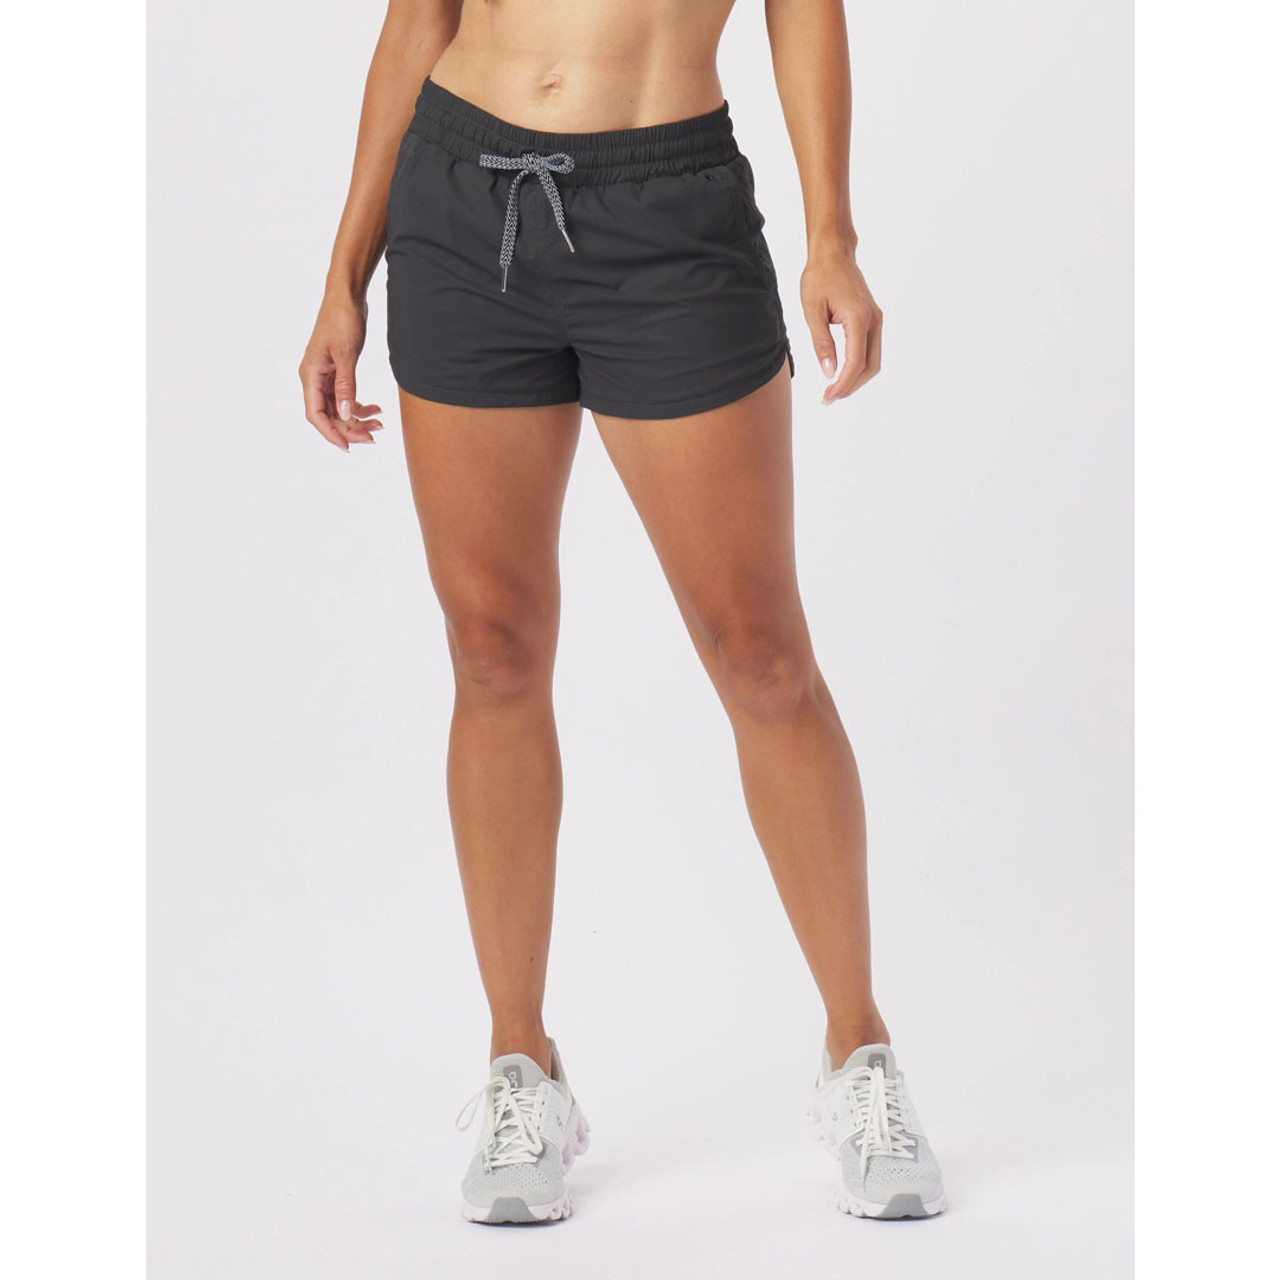 Only Play Jacei workout tights in black